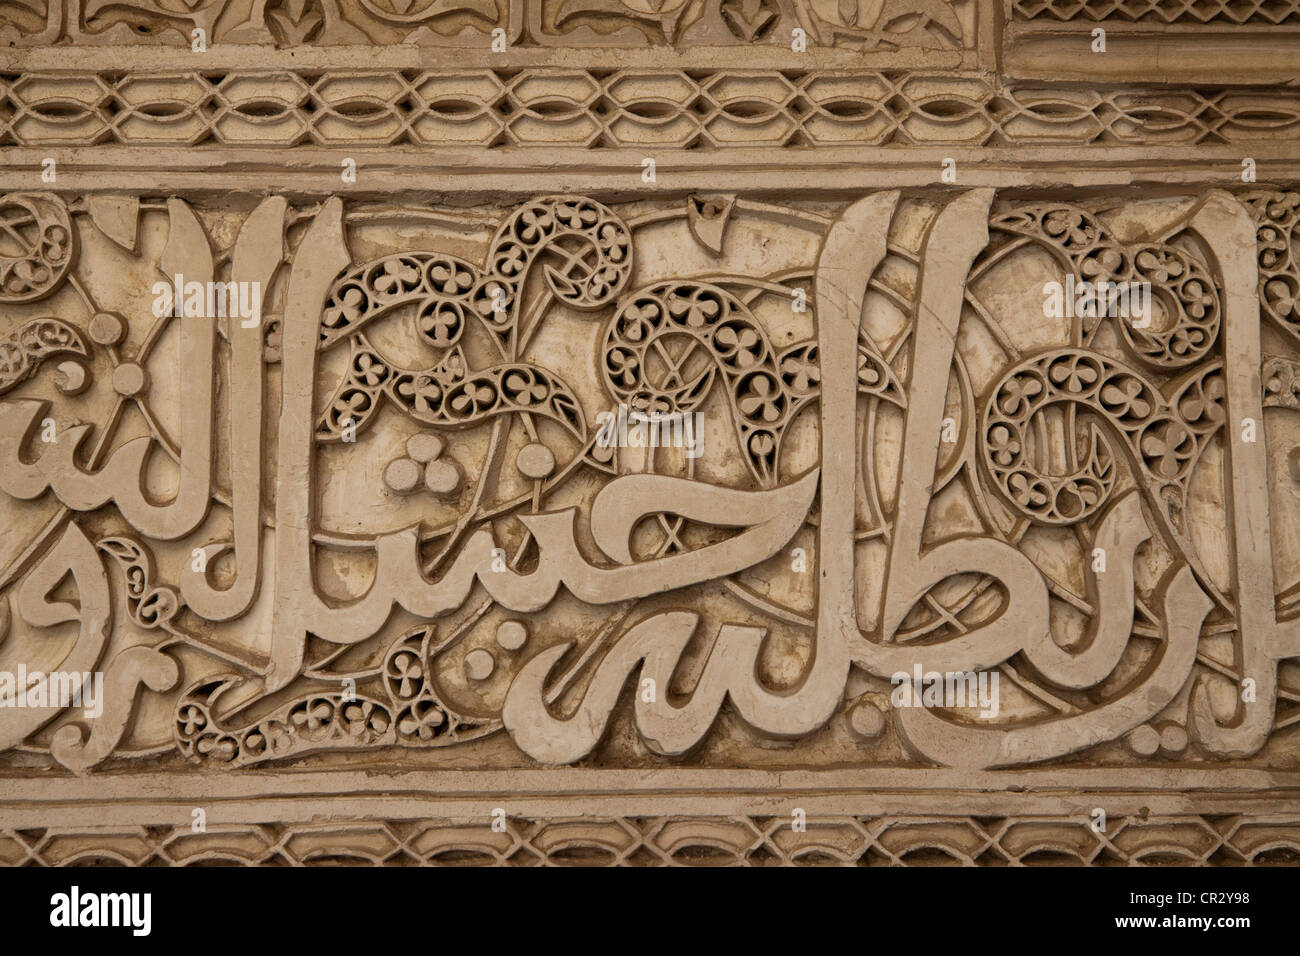 Arabic writing on a wall in Fes or Fez in Morocco, Africa Stock Photo